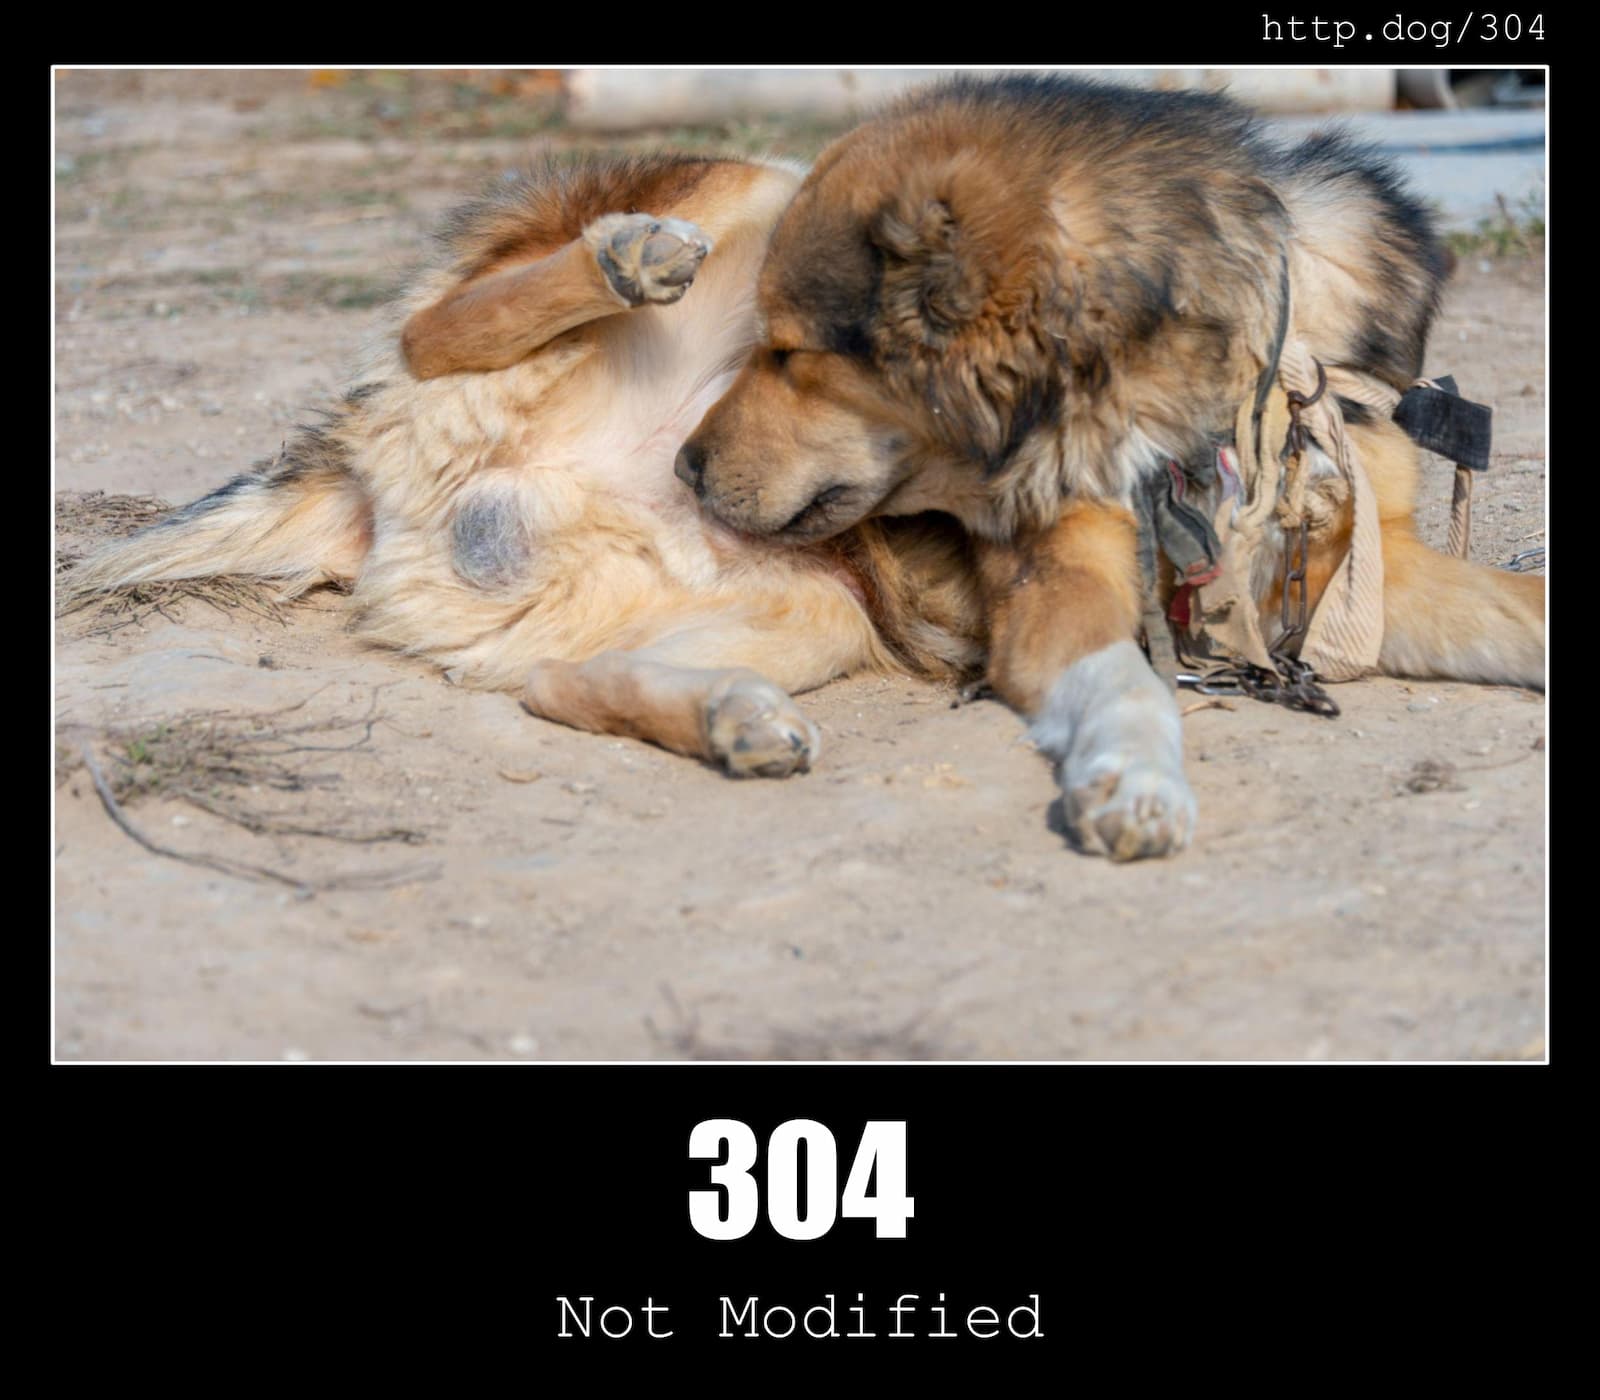 HTTP Status Code 304 Not Modified & Dogs